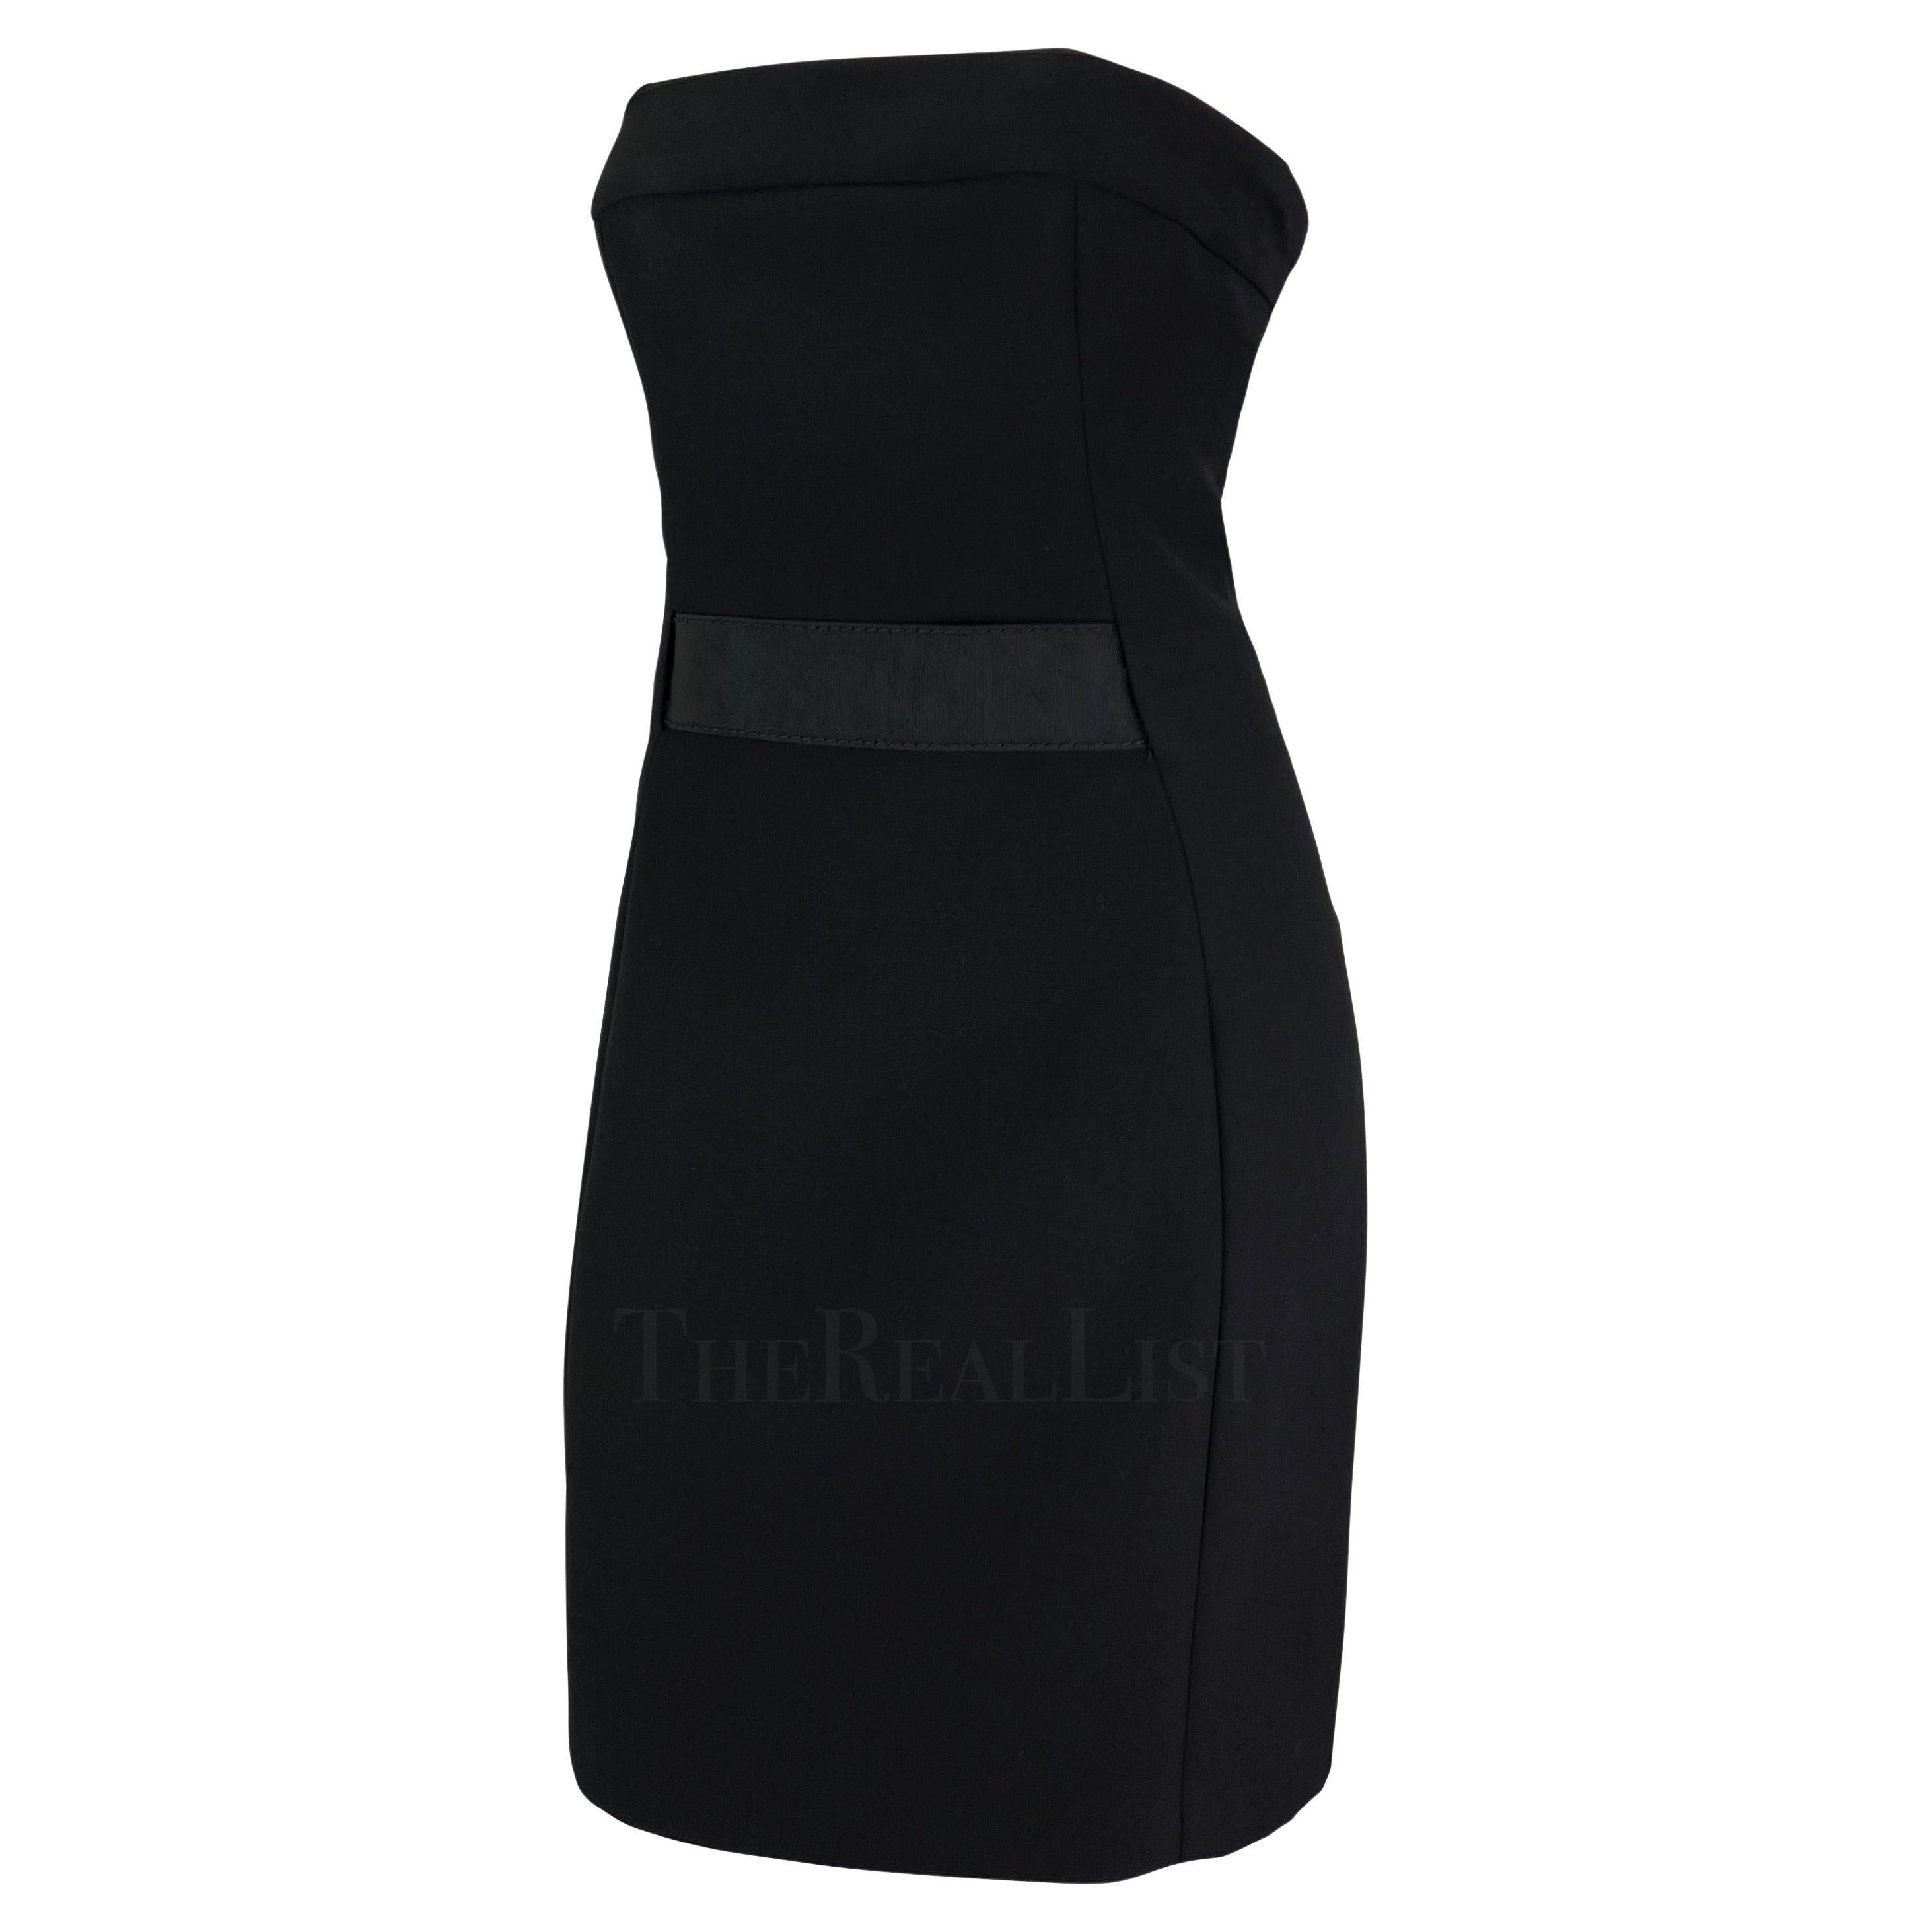 F/W 2001 Gucci by Tom Ford Corseted Black Strapless Tube Mini Dress For Sale